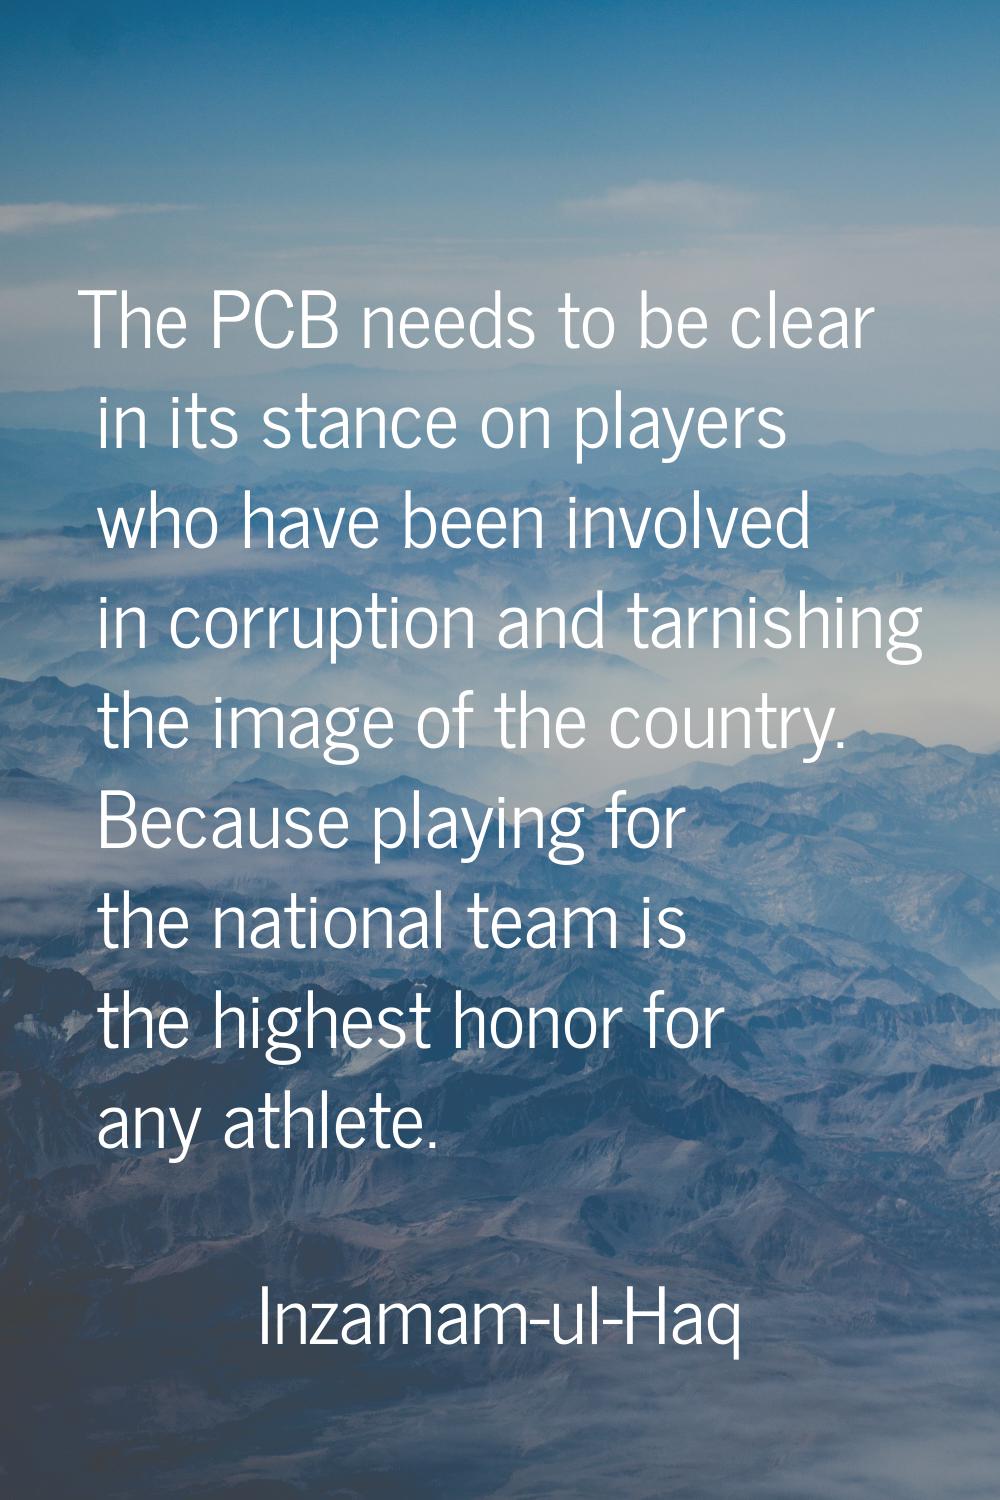 The PCB needs to be clear in its stance on players who have been involved in corruption and tarnish